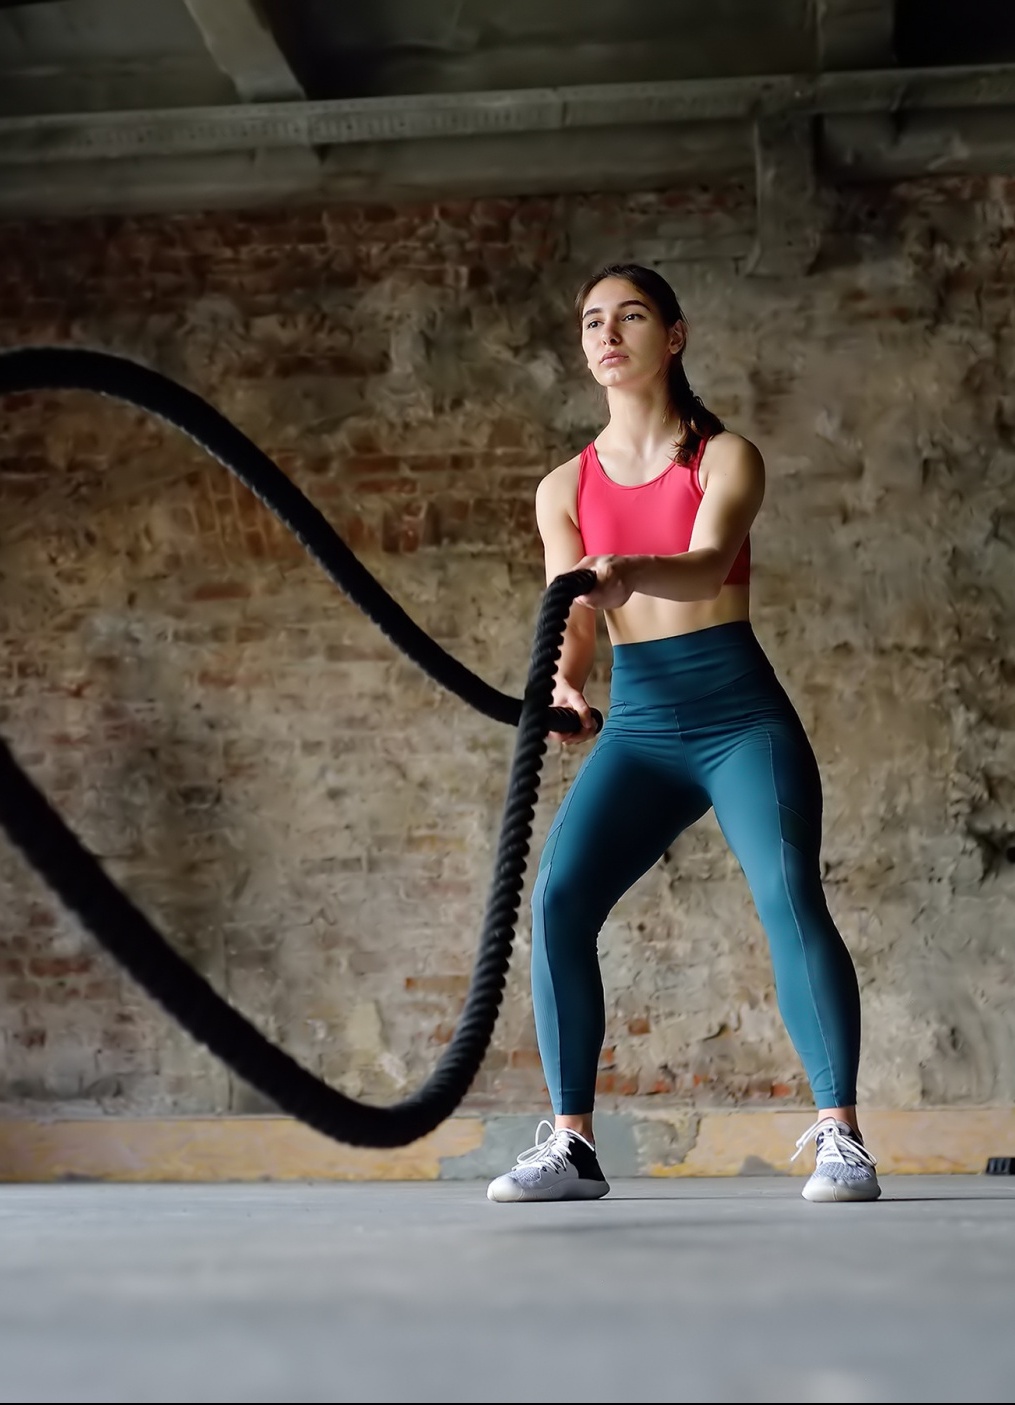 most effective exercise methods for women over 40, long dark-haired woman in bright pink sports bra and teal leggings with battle ropes